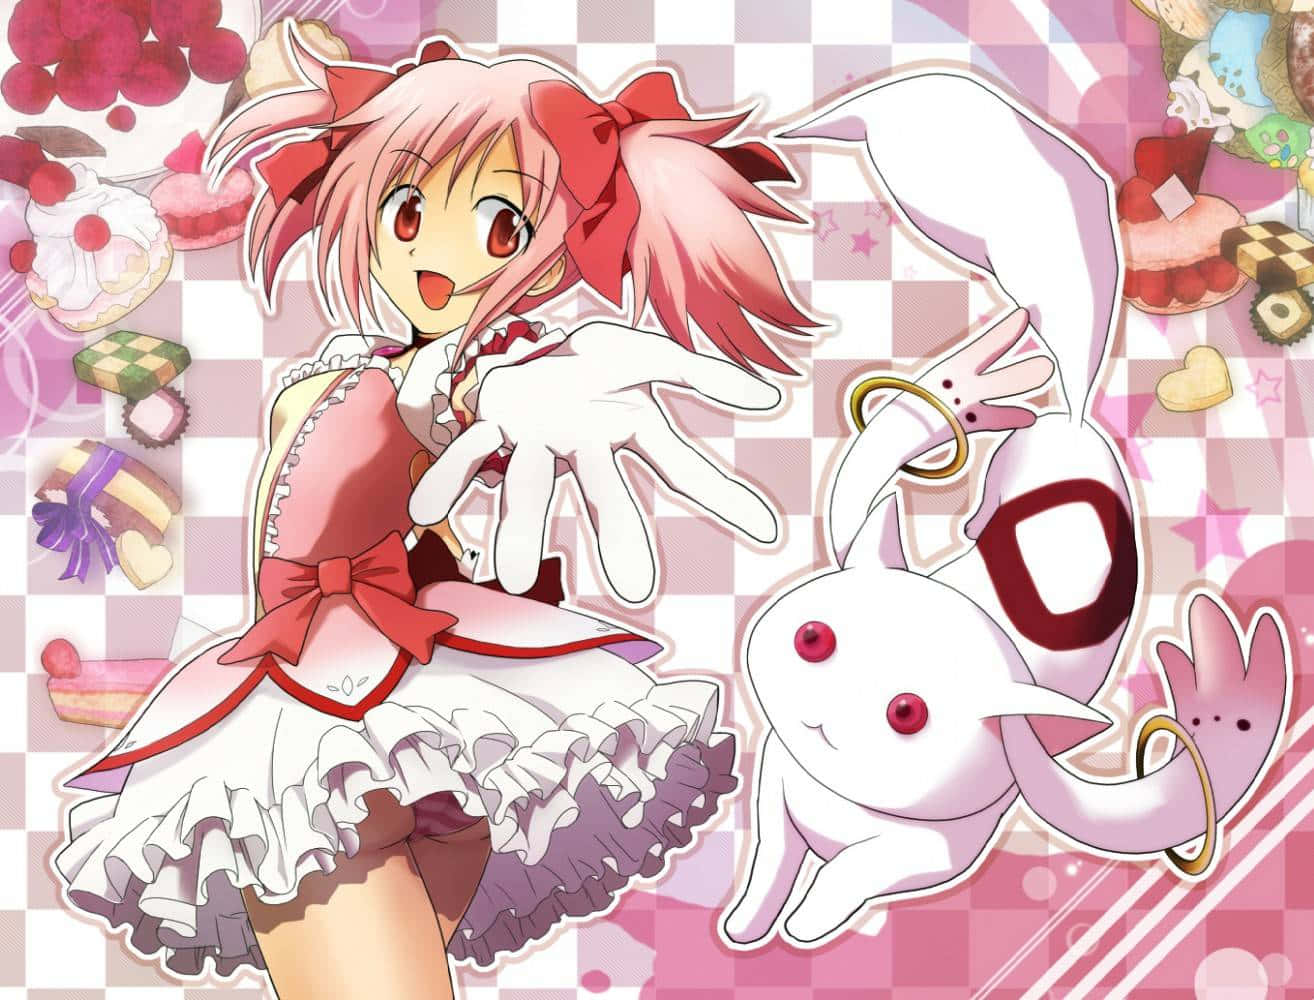 The magical girl from Madoka Magica.